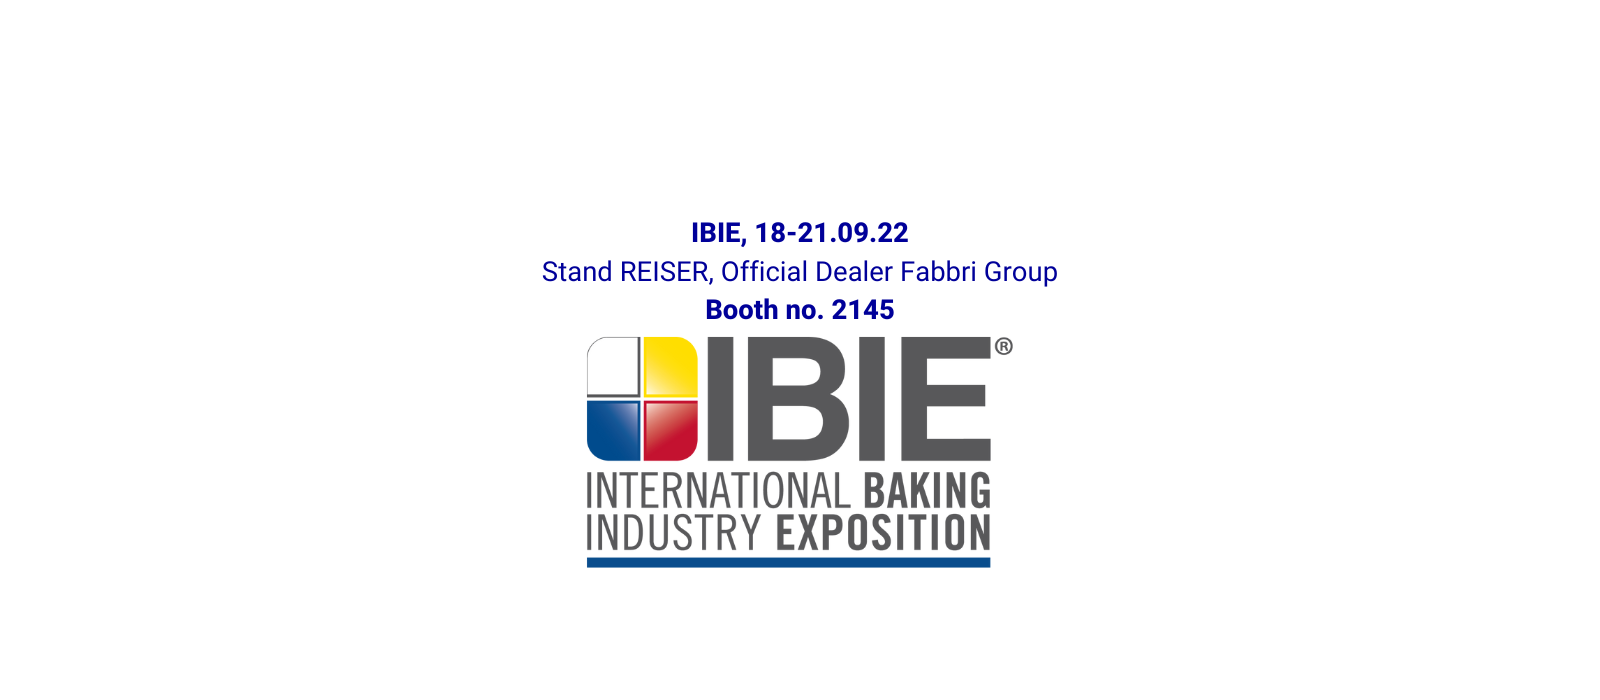 Appointment with Fabbri Group at IBIE 2022, Las Vegas